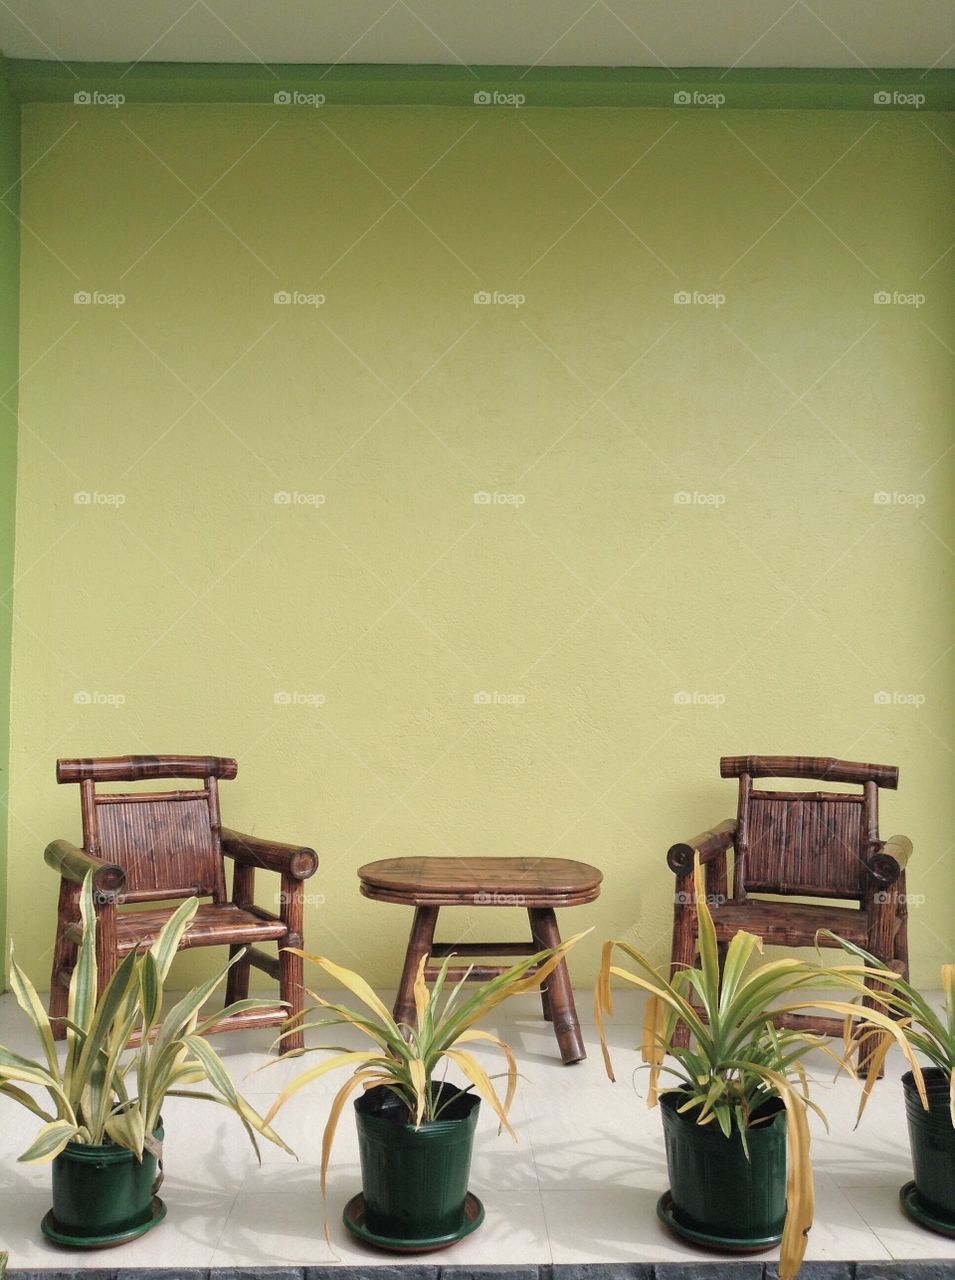 Tropical seating area